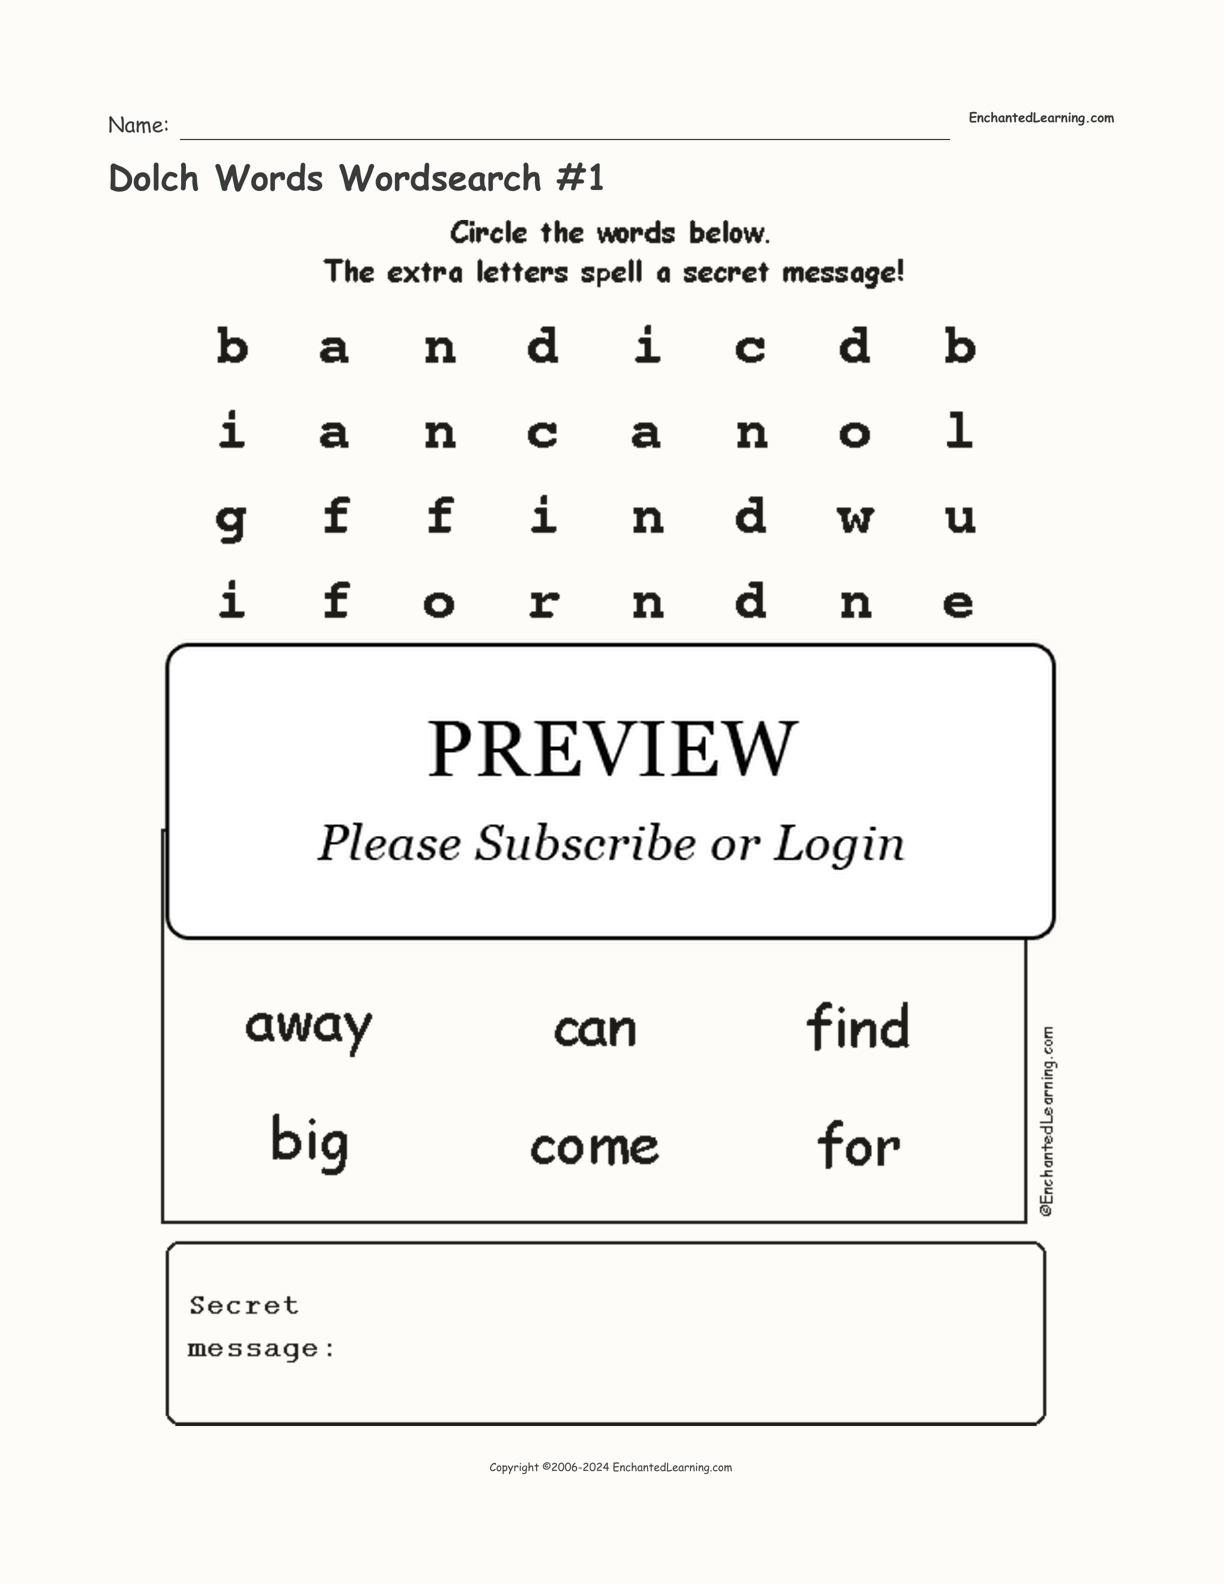 Dolch Words Wordsearch #1 interactive worksheet page 1